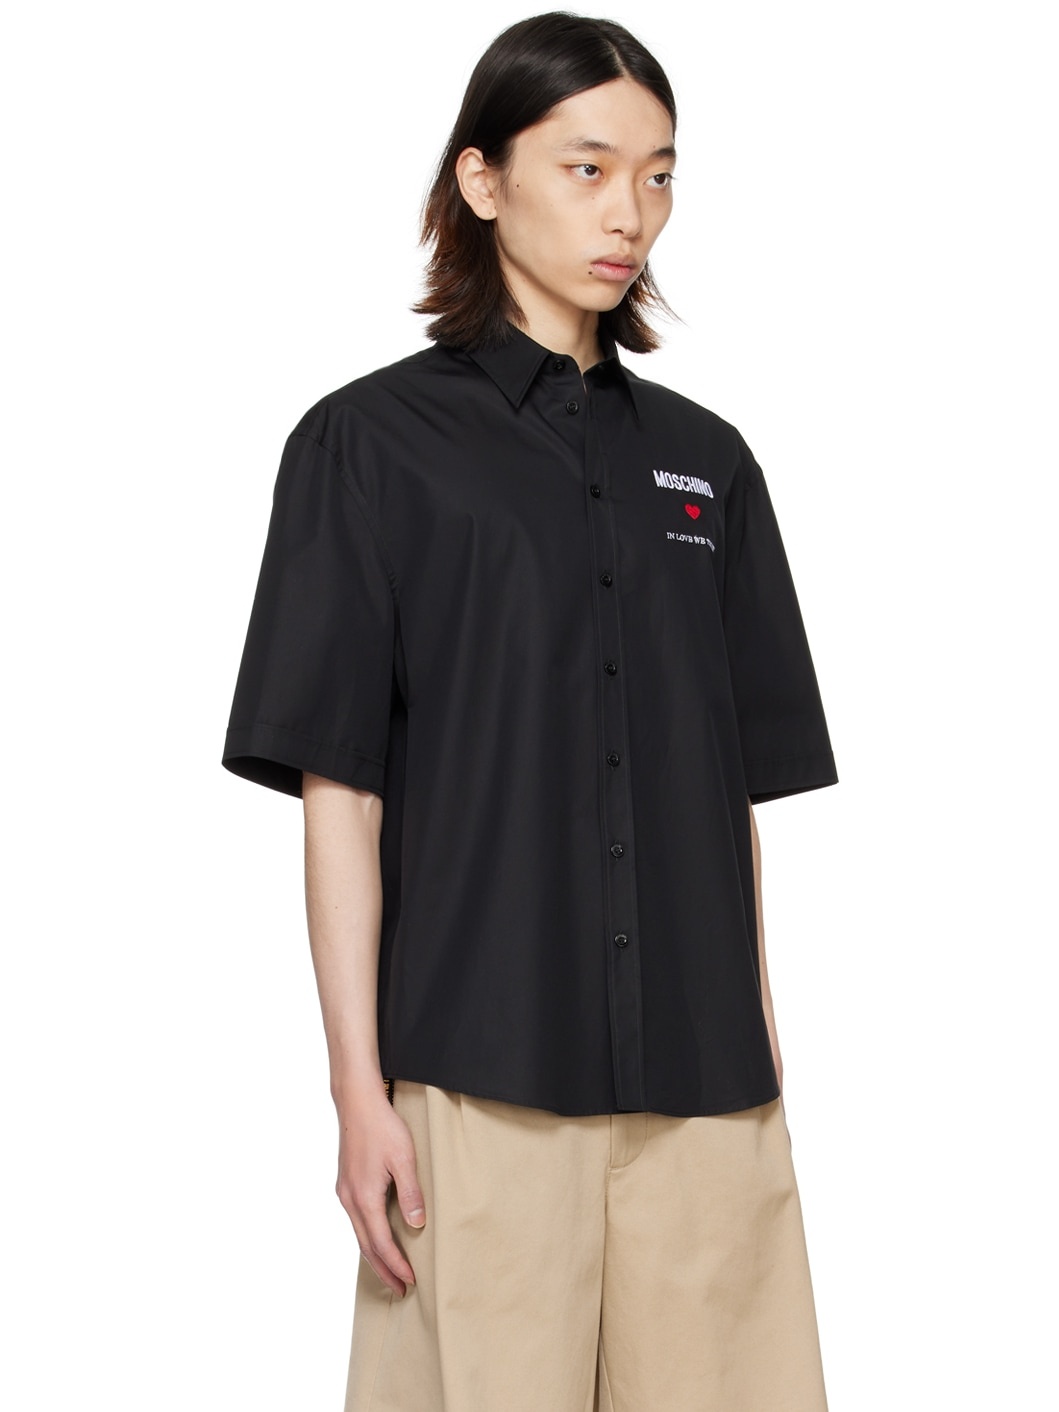 Black Embroidered Shirt - 2